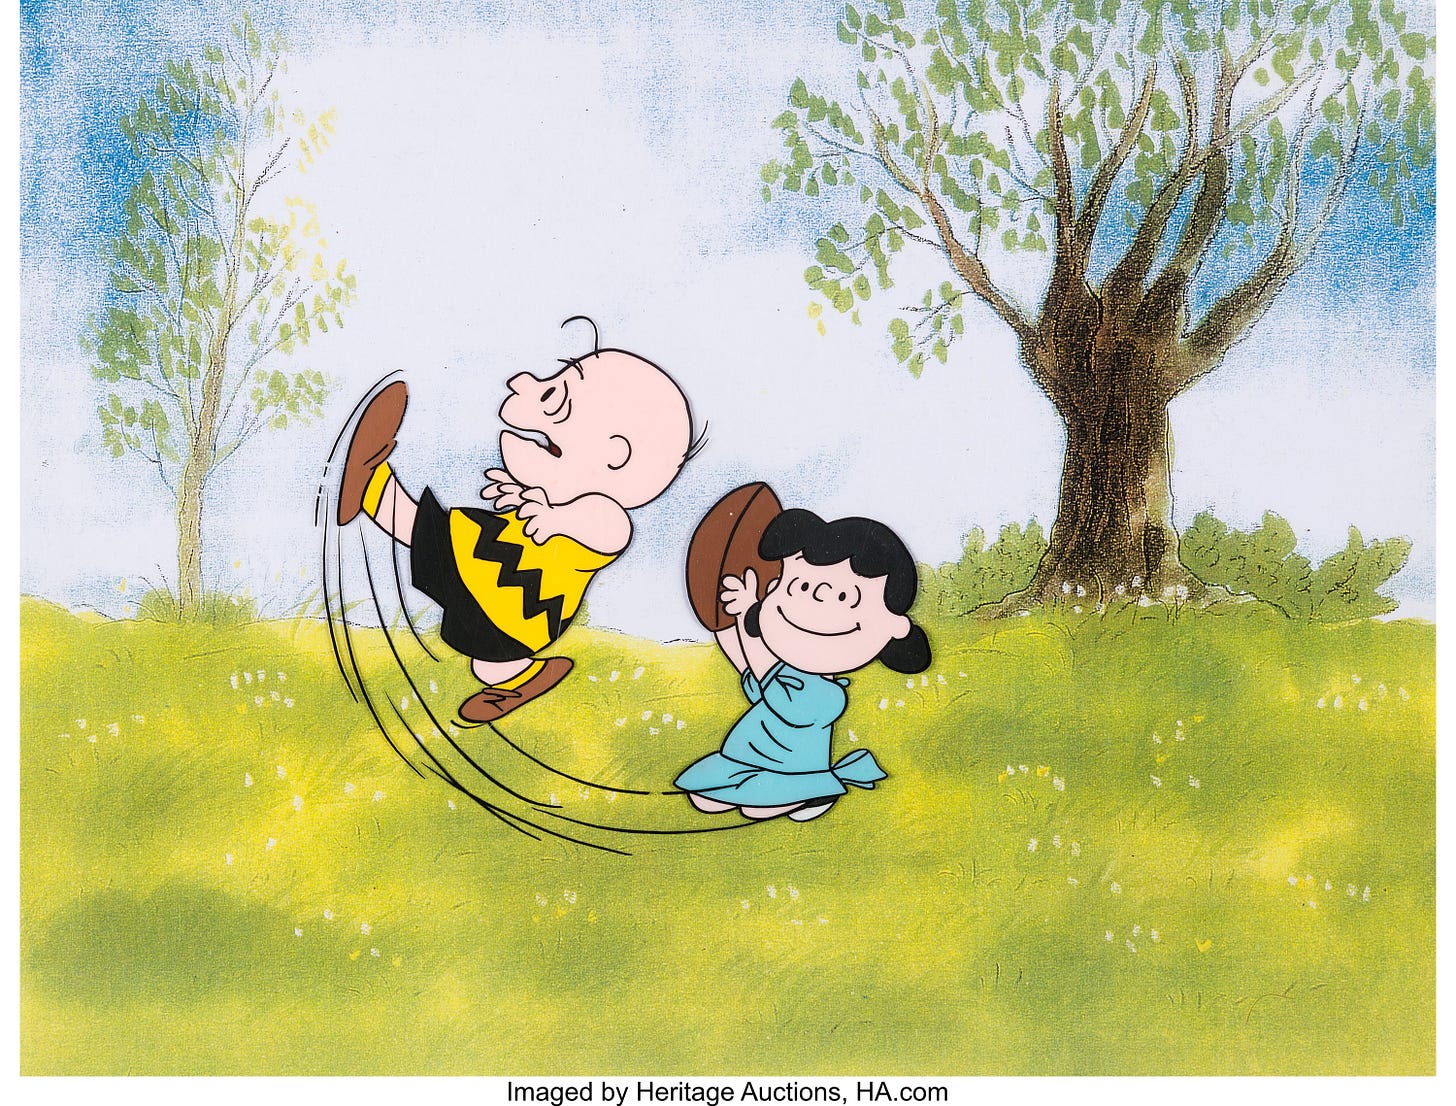 Peanuts - It's the Great Pumpkin, Charlie Brown Charlie Brown and | Lot #96128 | Heritage Auctions